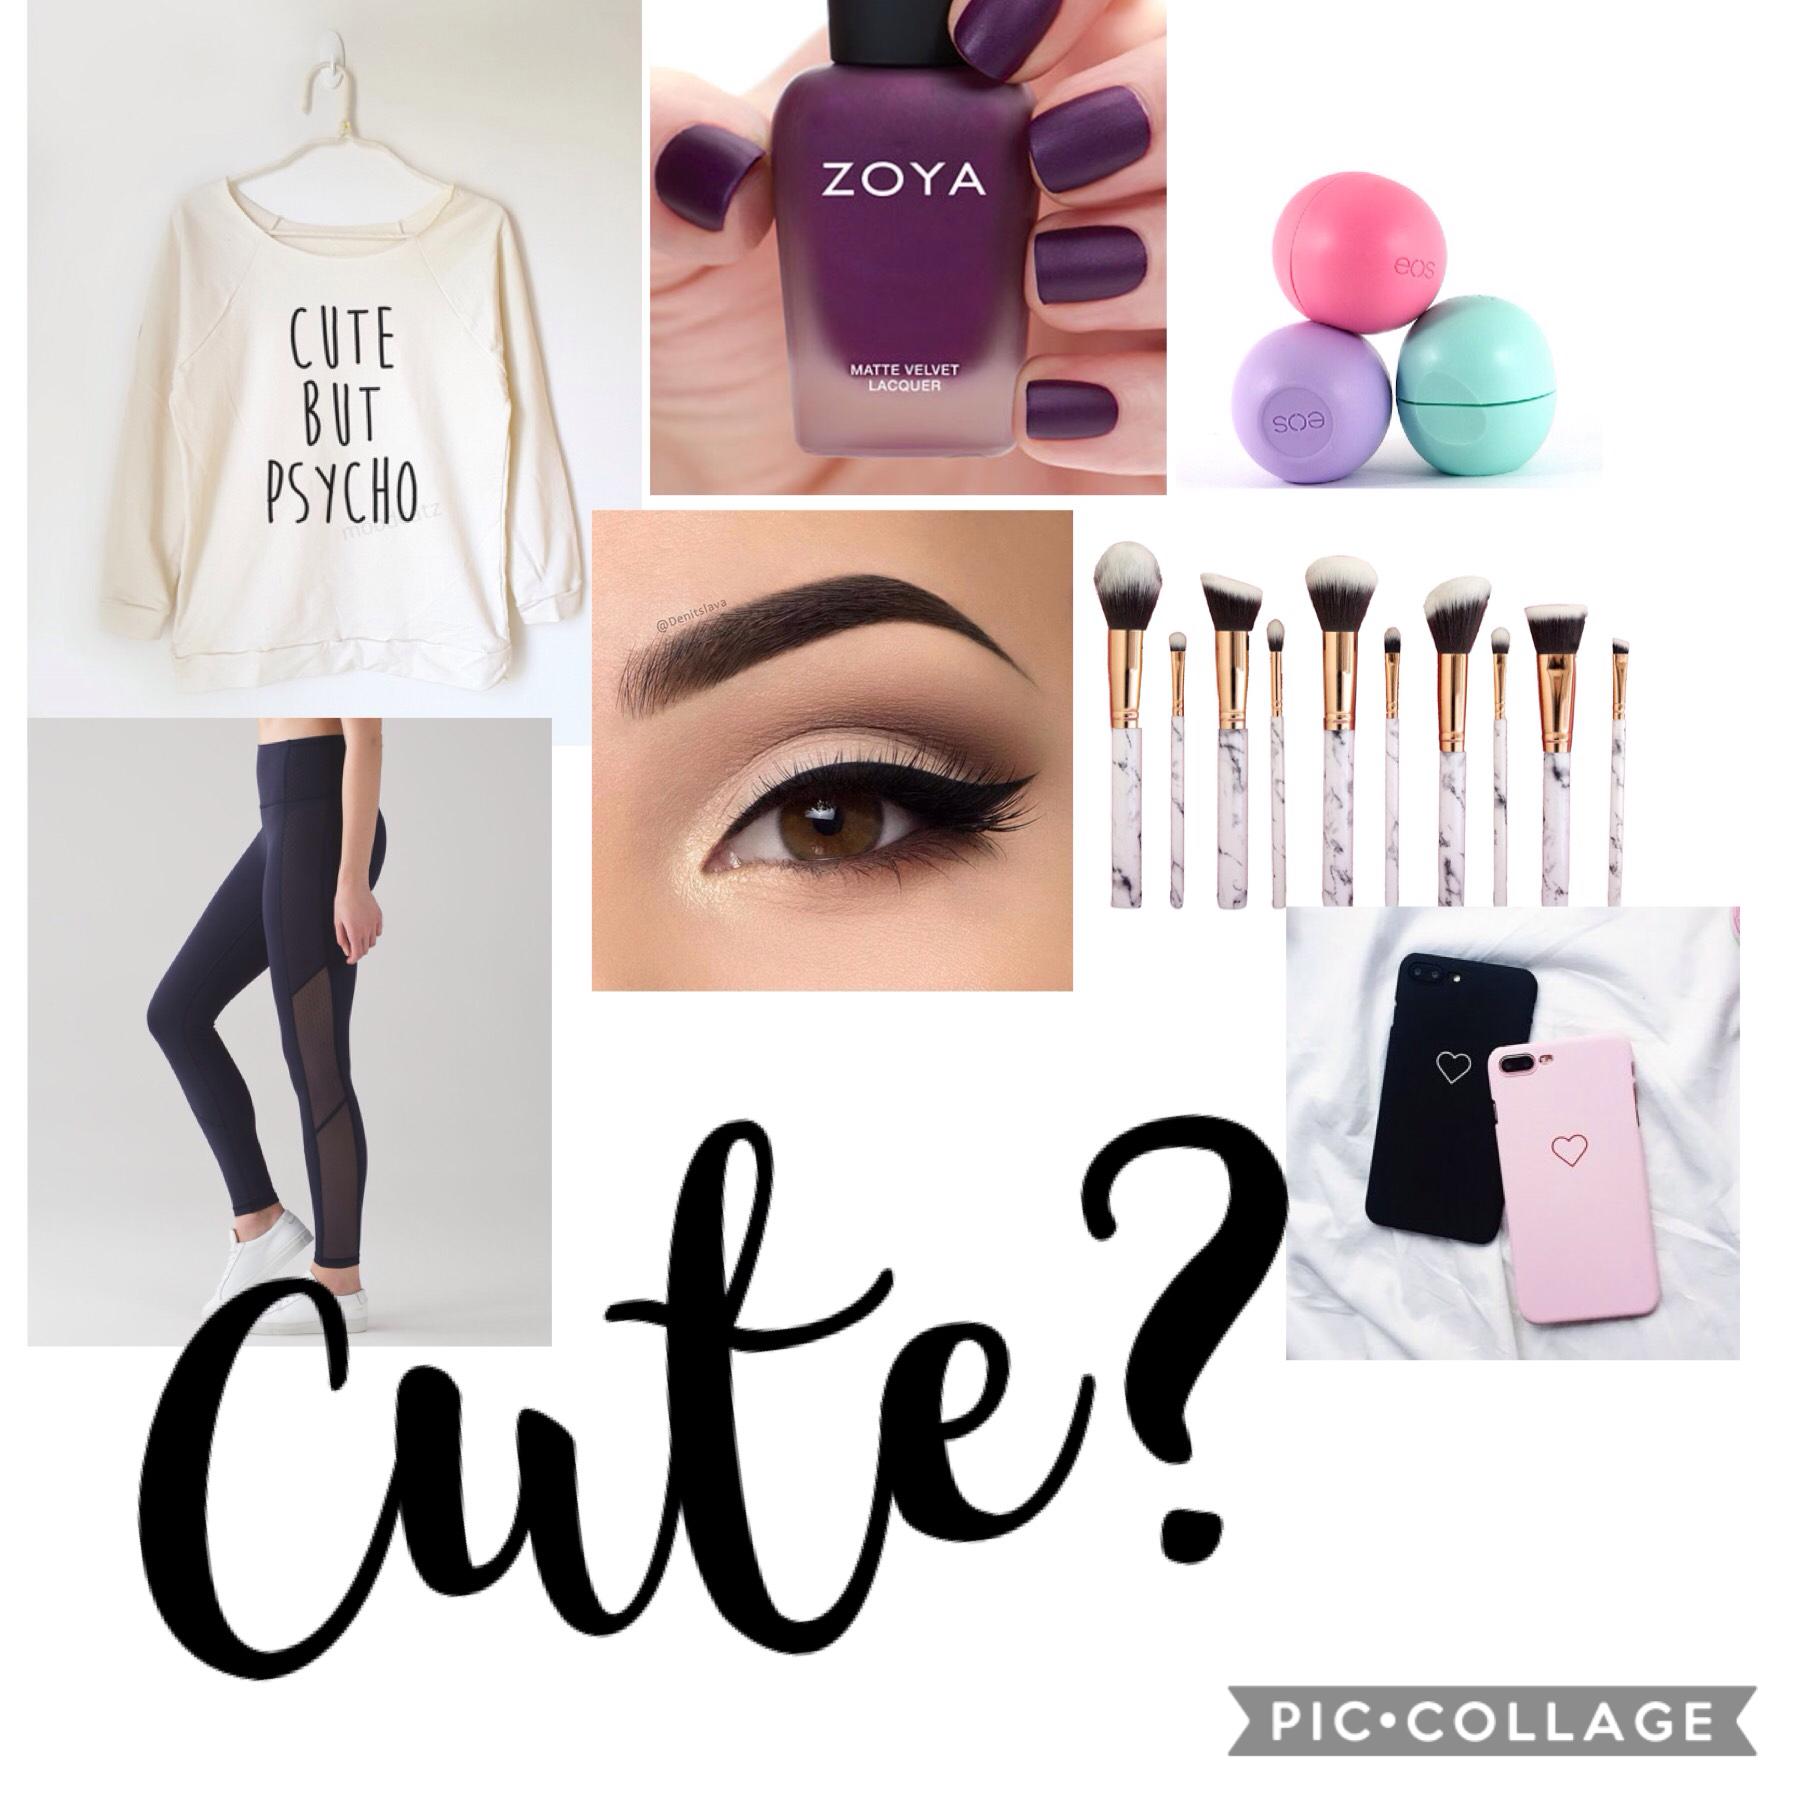 Like and comment if this is cute please!!